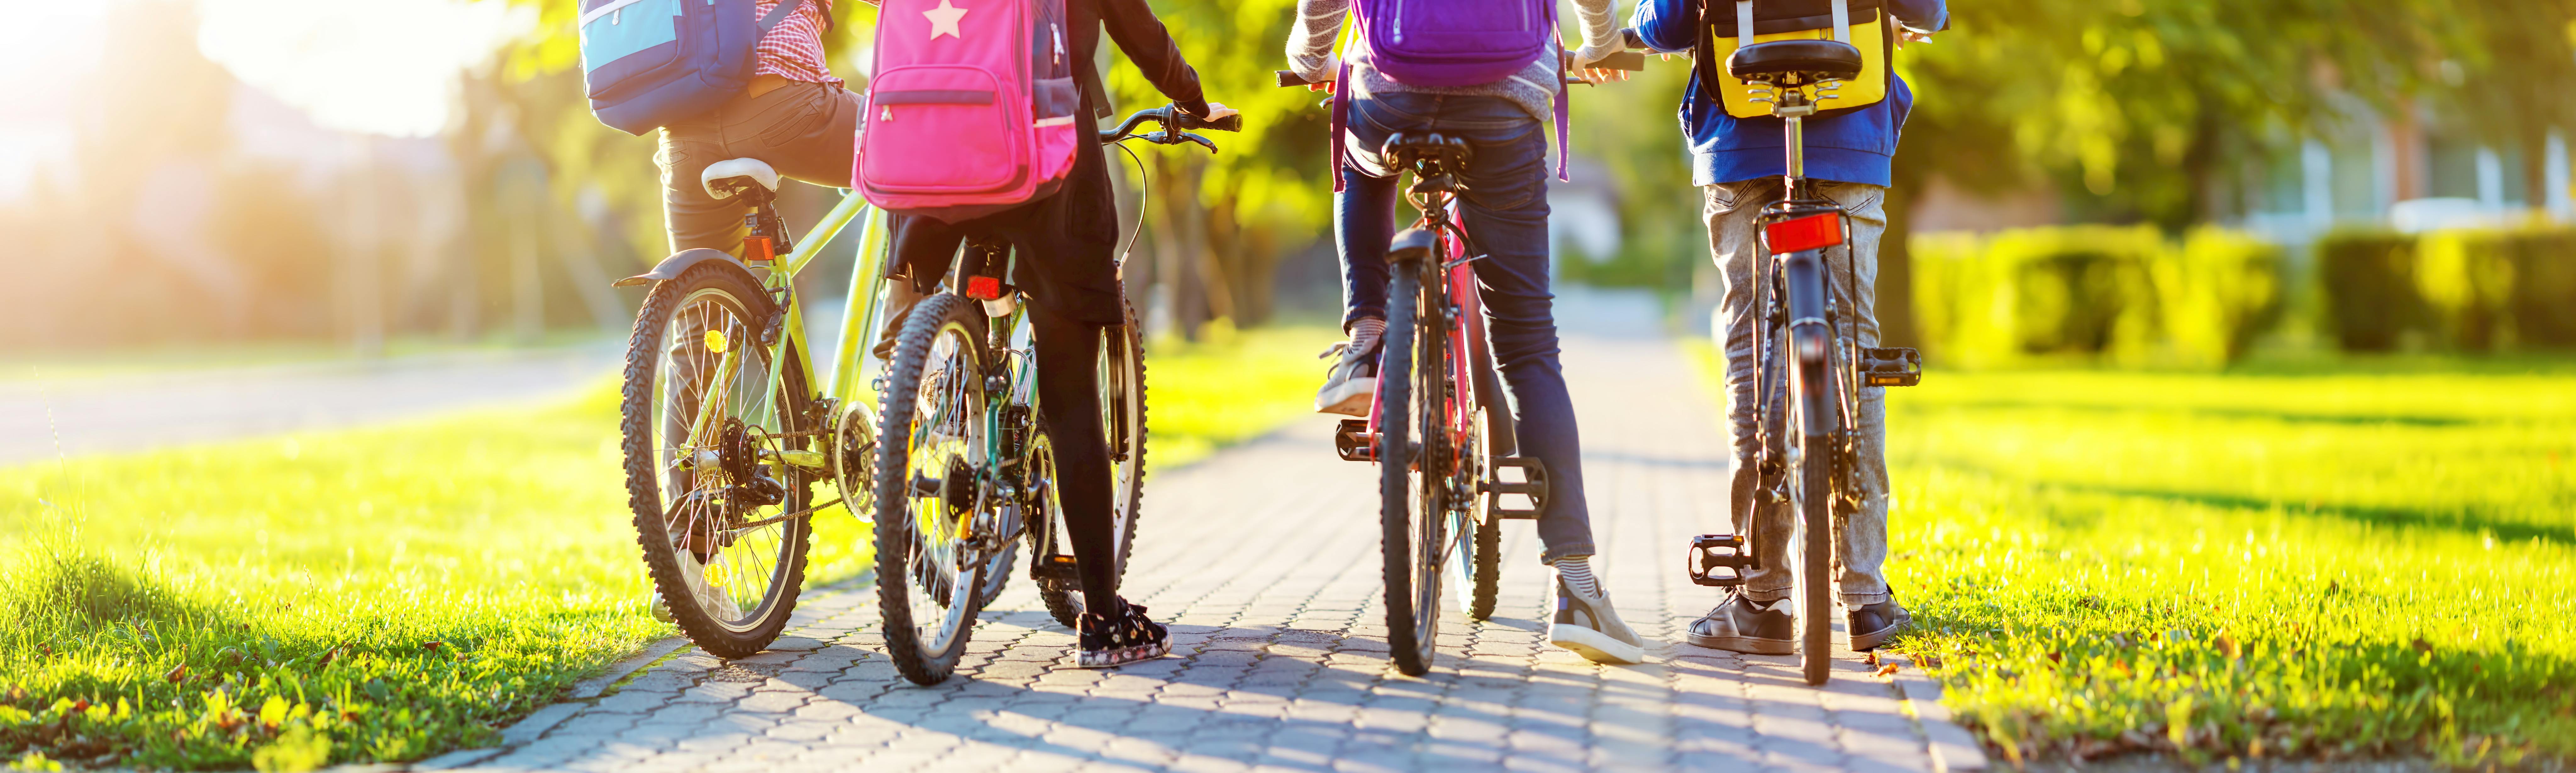 Image of four children on bikes riding along a sunny path.